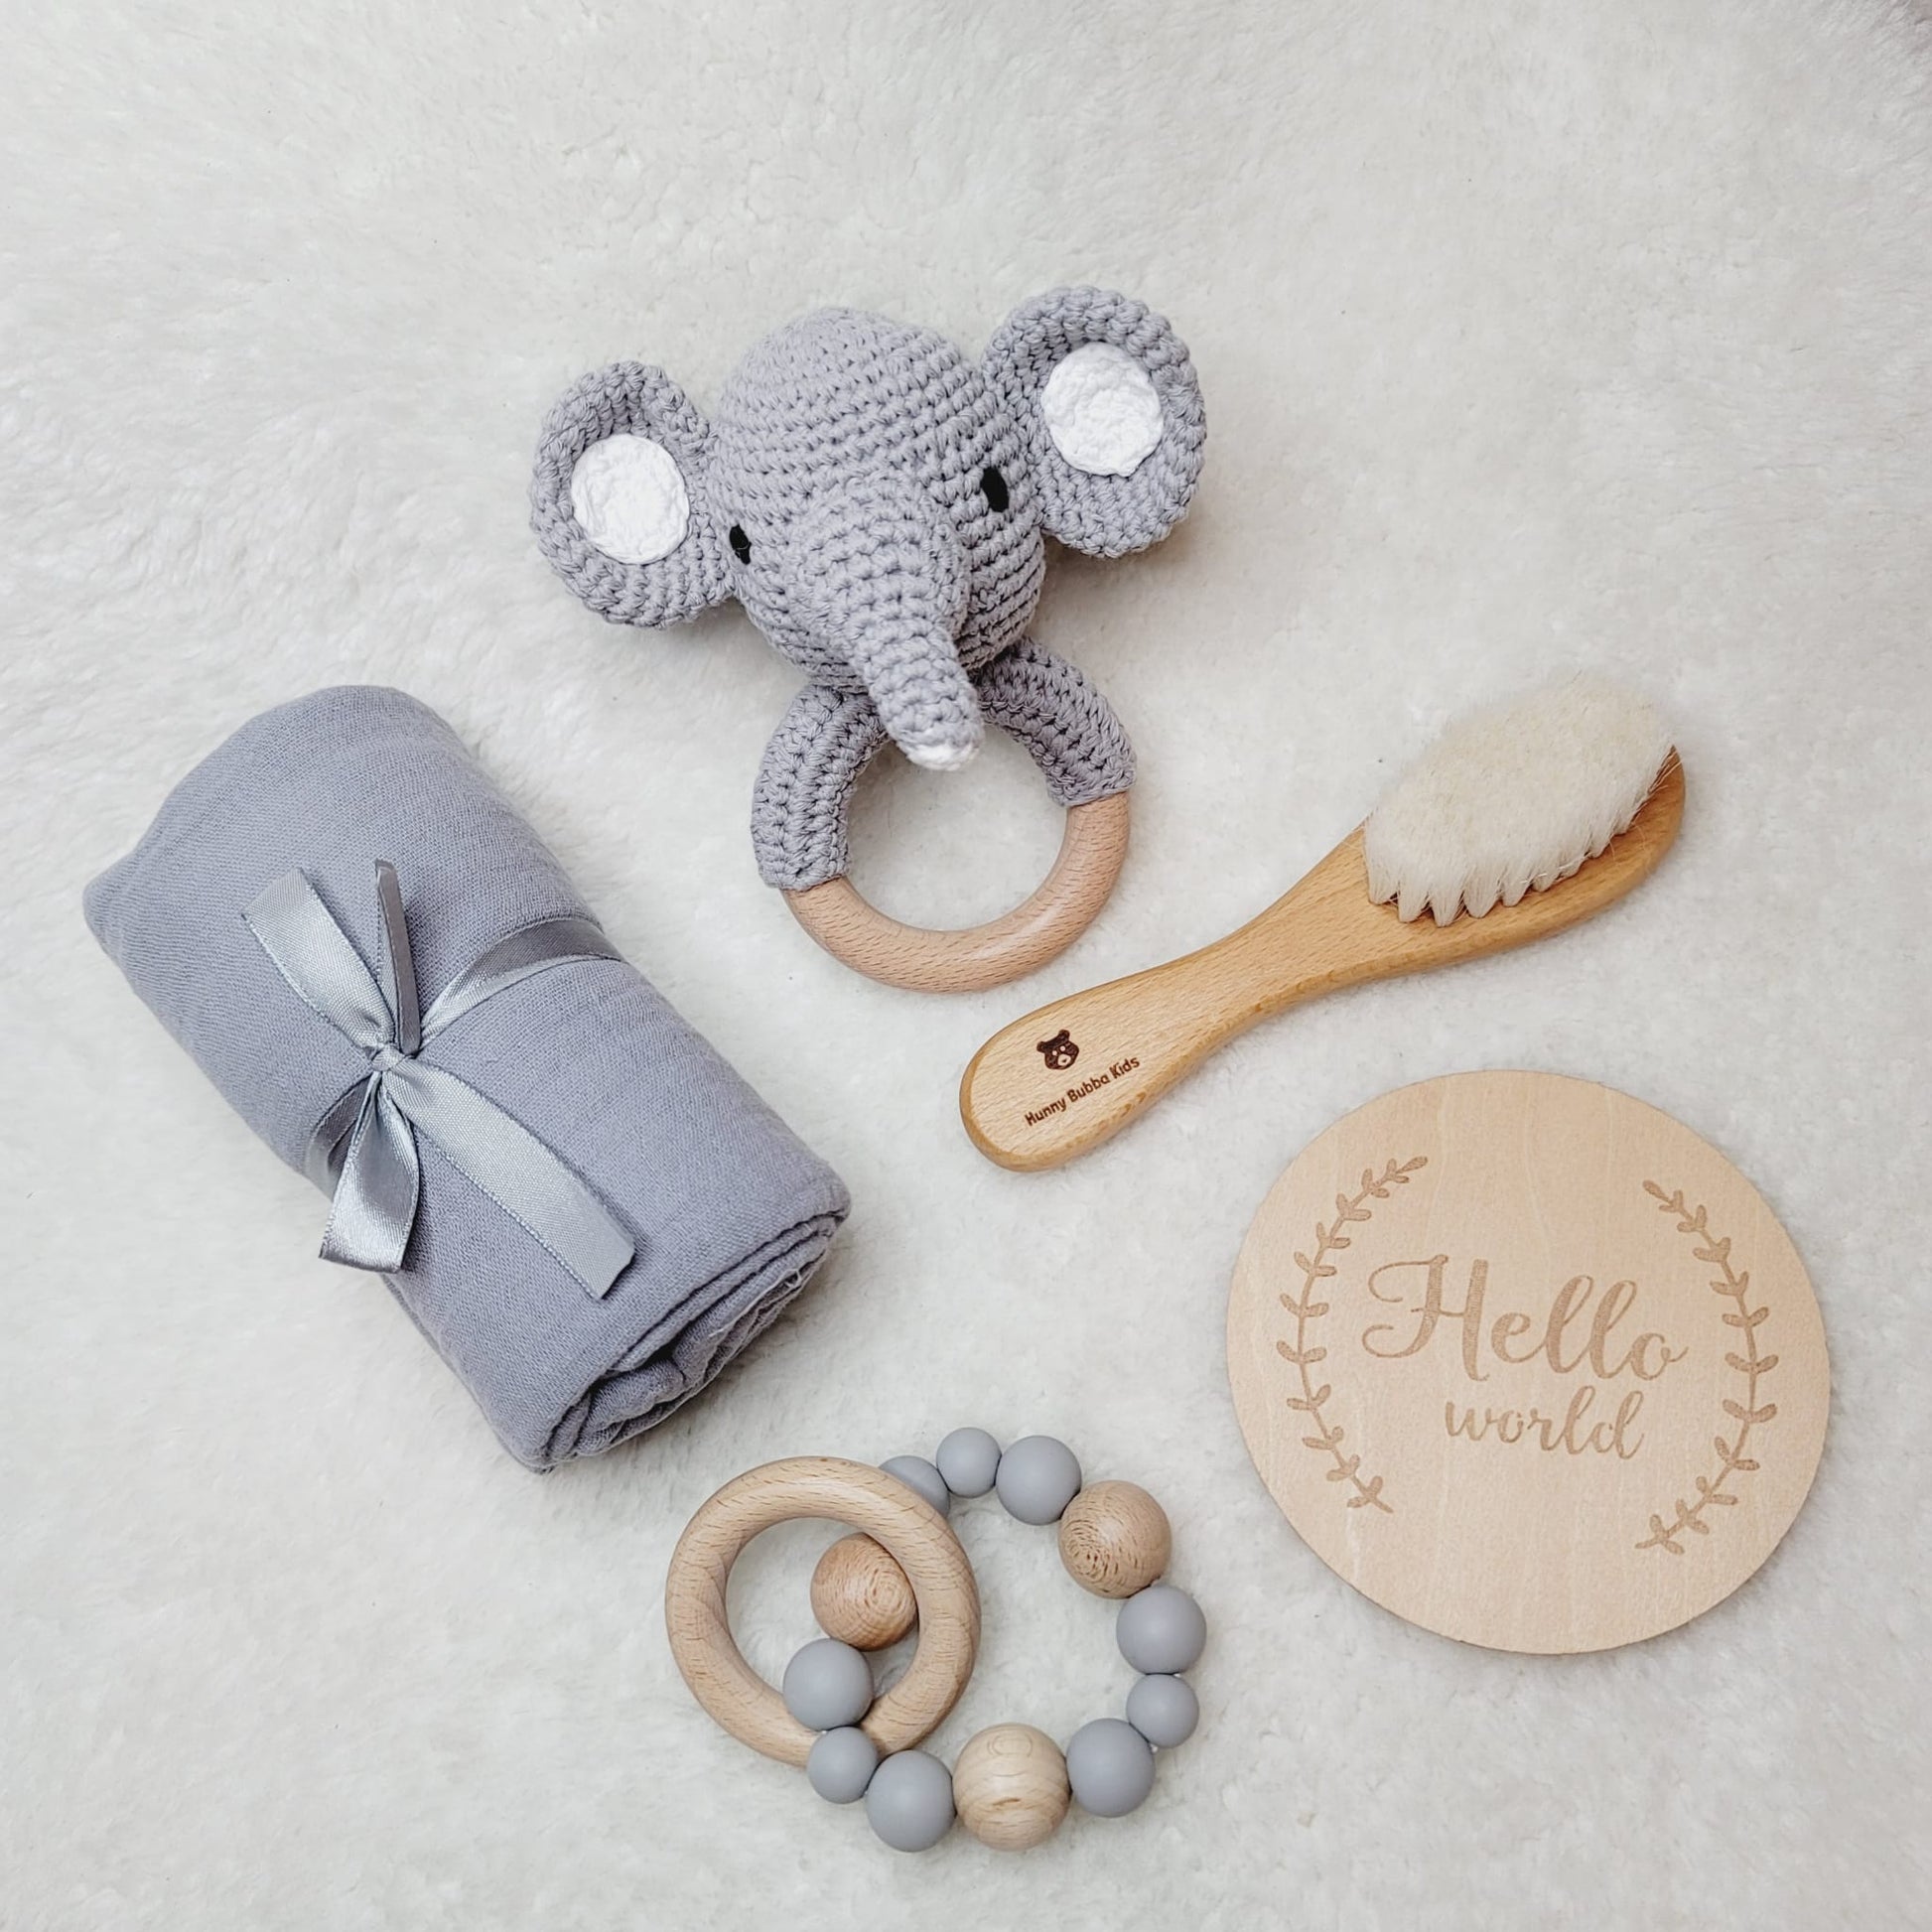 a grey newborn baby gift set with an elephant crochet rattle, a hairbrush, and wooden and silicone rattle and a swaddle laid on a soft surface